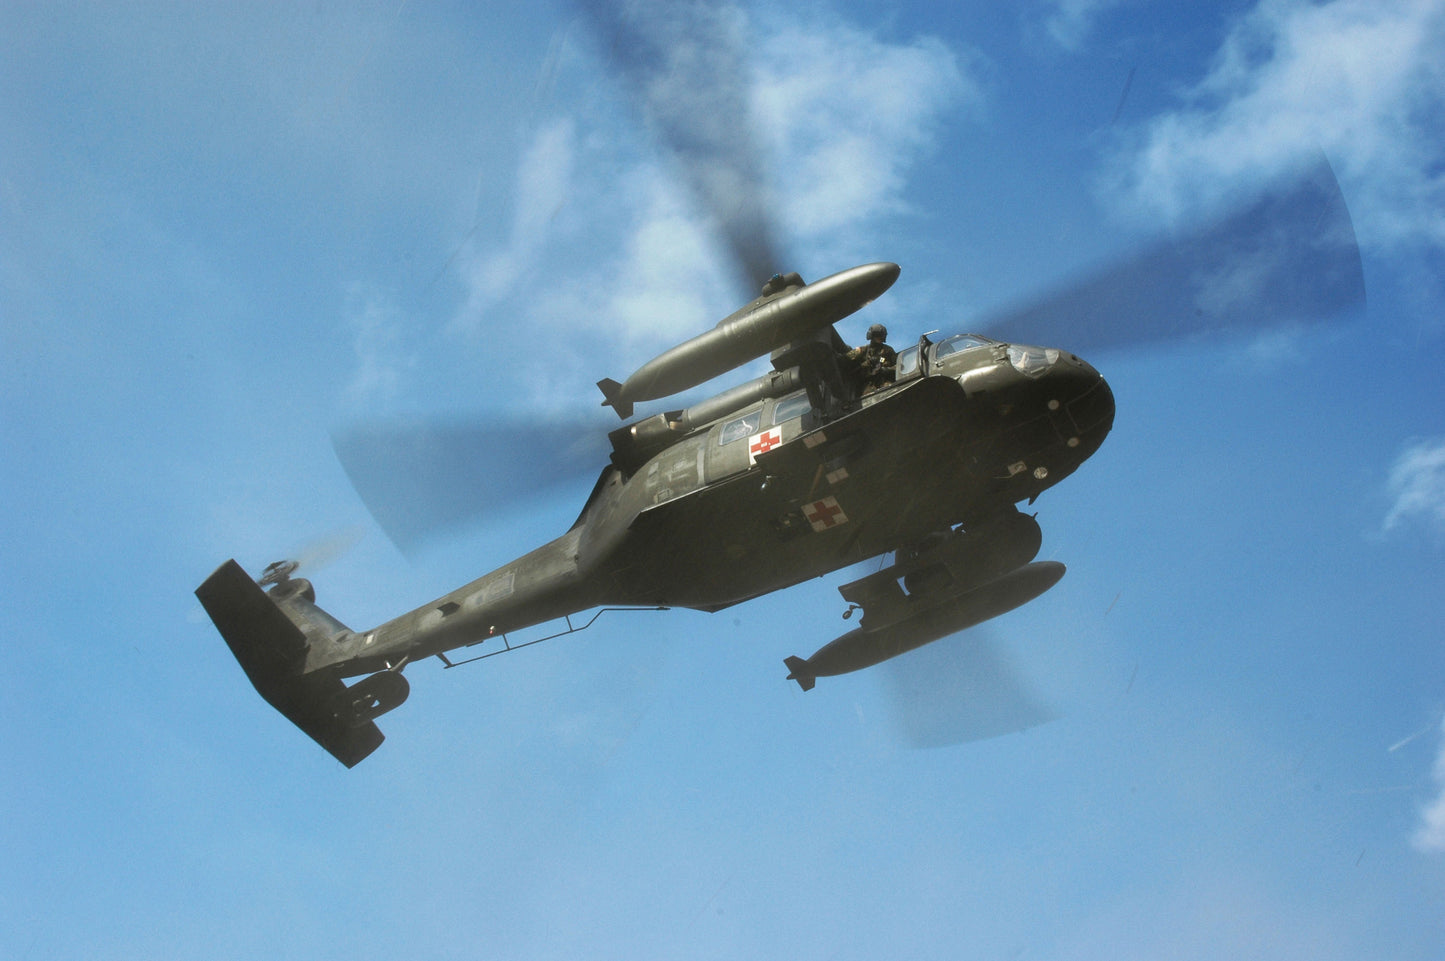 SIKORSKY UH-60 BLACK HAWK GLOSSY POSTER PICTURE PHOTO PRINT BANNER